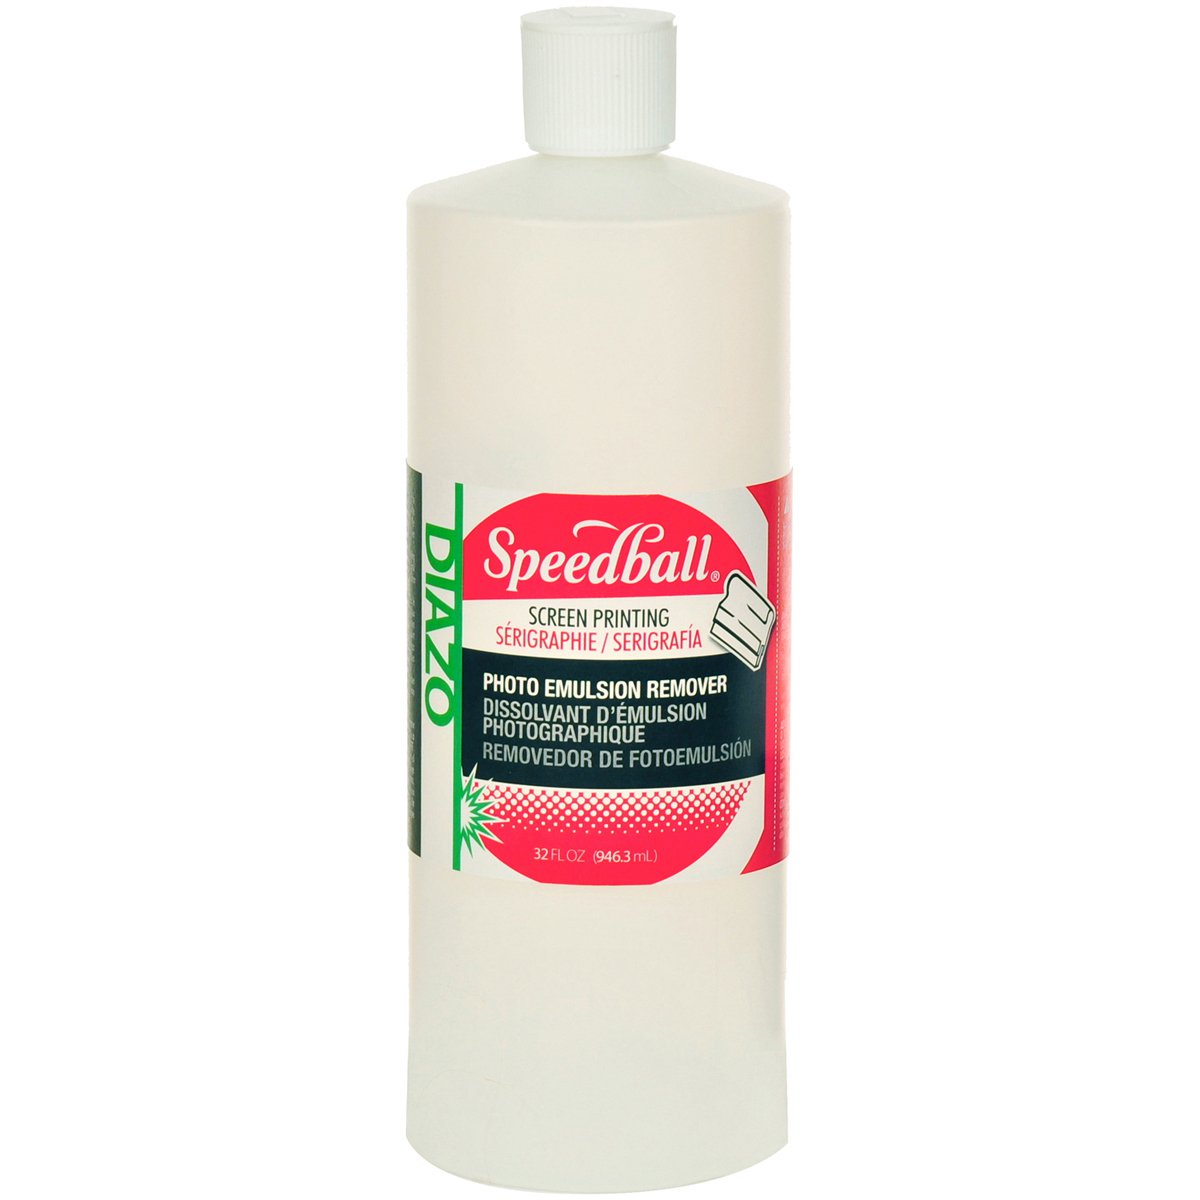 Speedball - 32 oz. DIAZO Photo Emulsion Remover in squirt bottle (4548316364887)